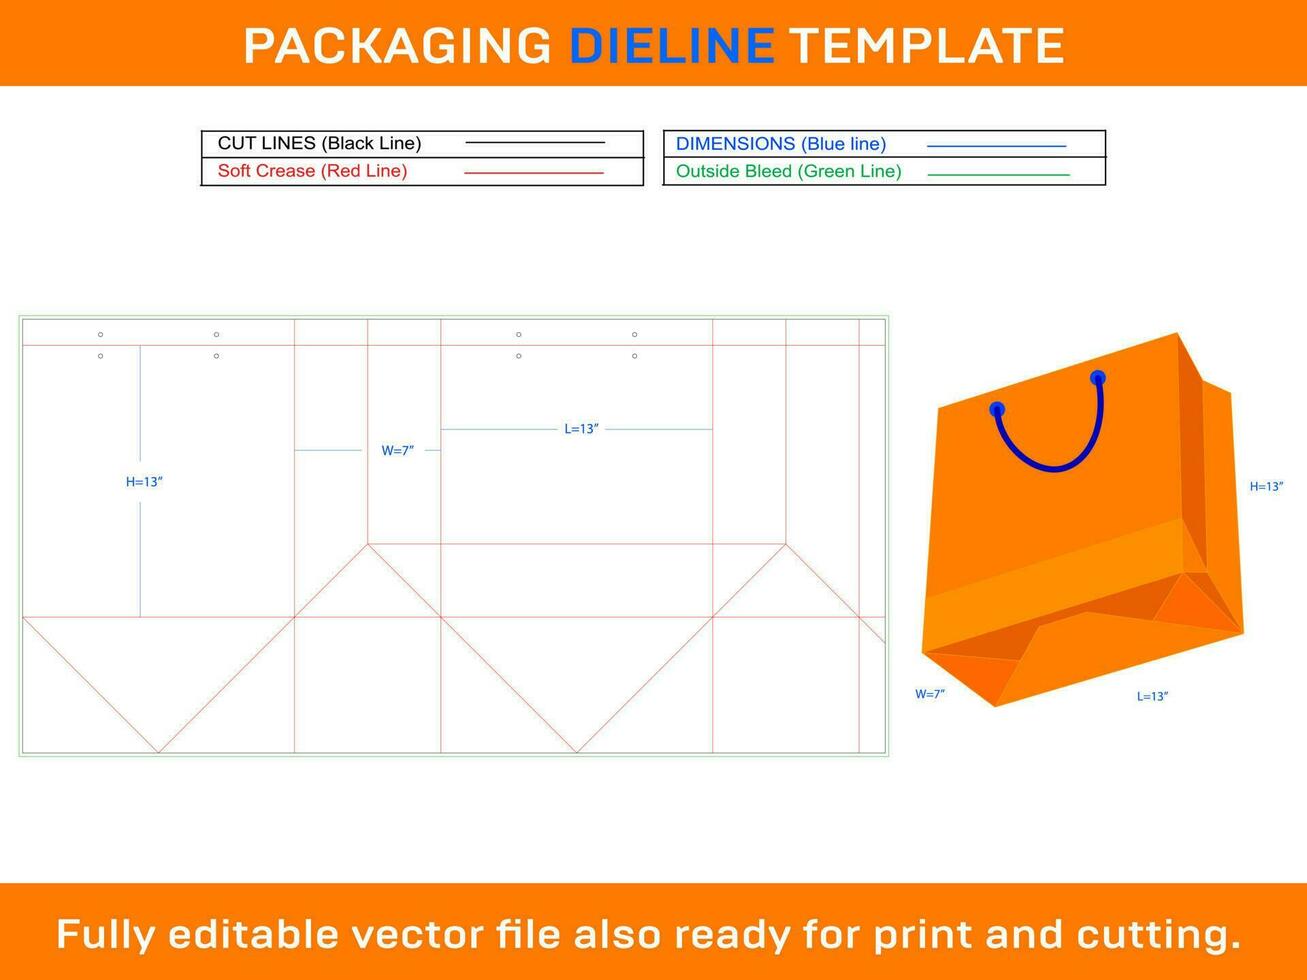 Shopping Bag 13x7x13 inch Dieline Template vector